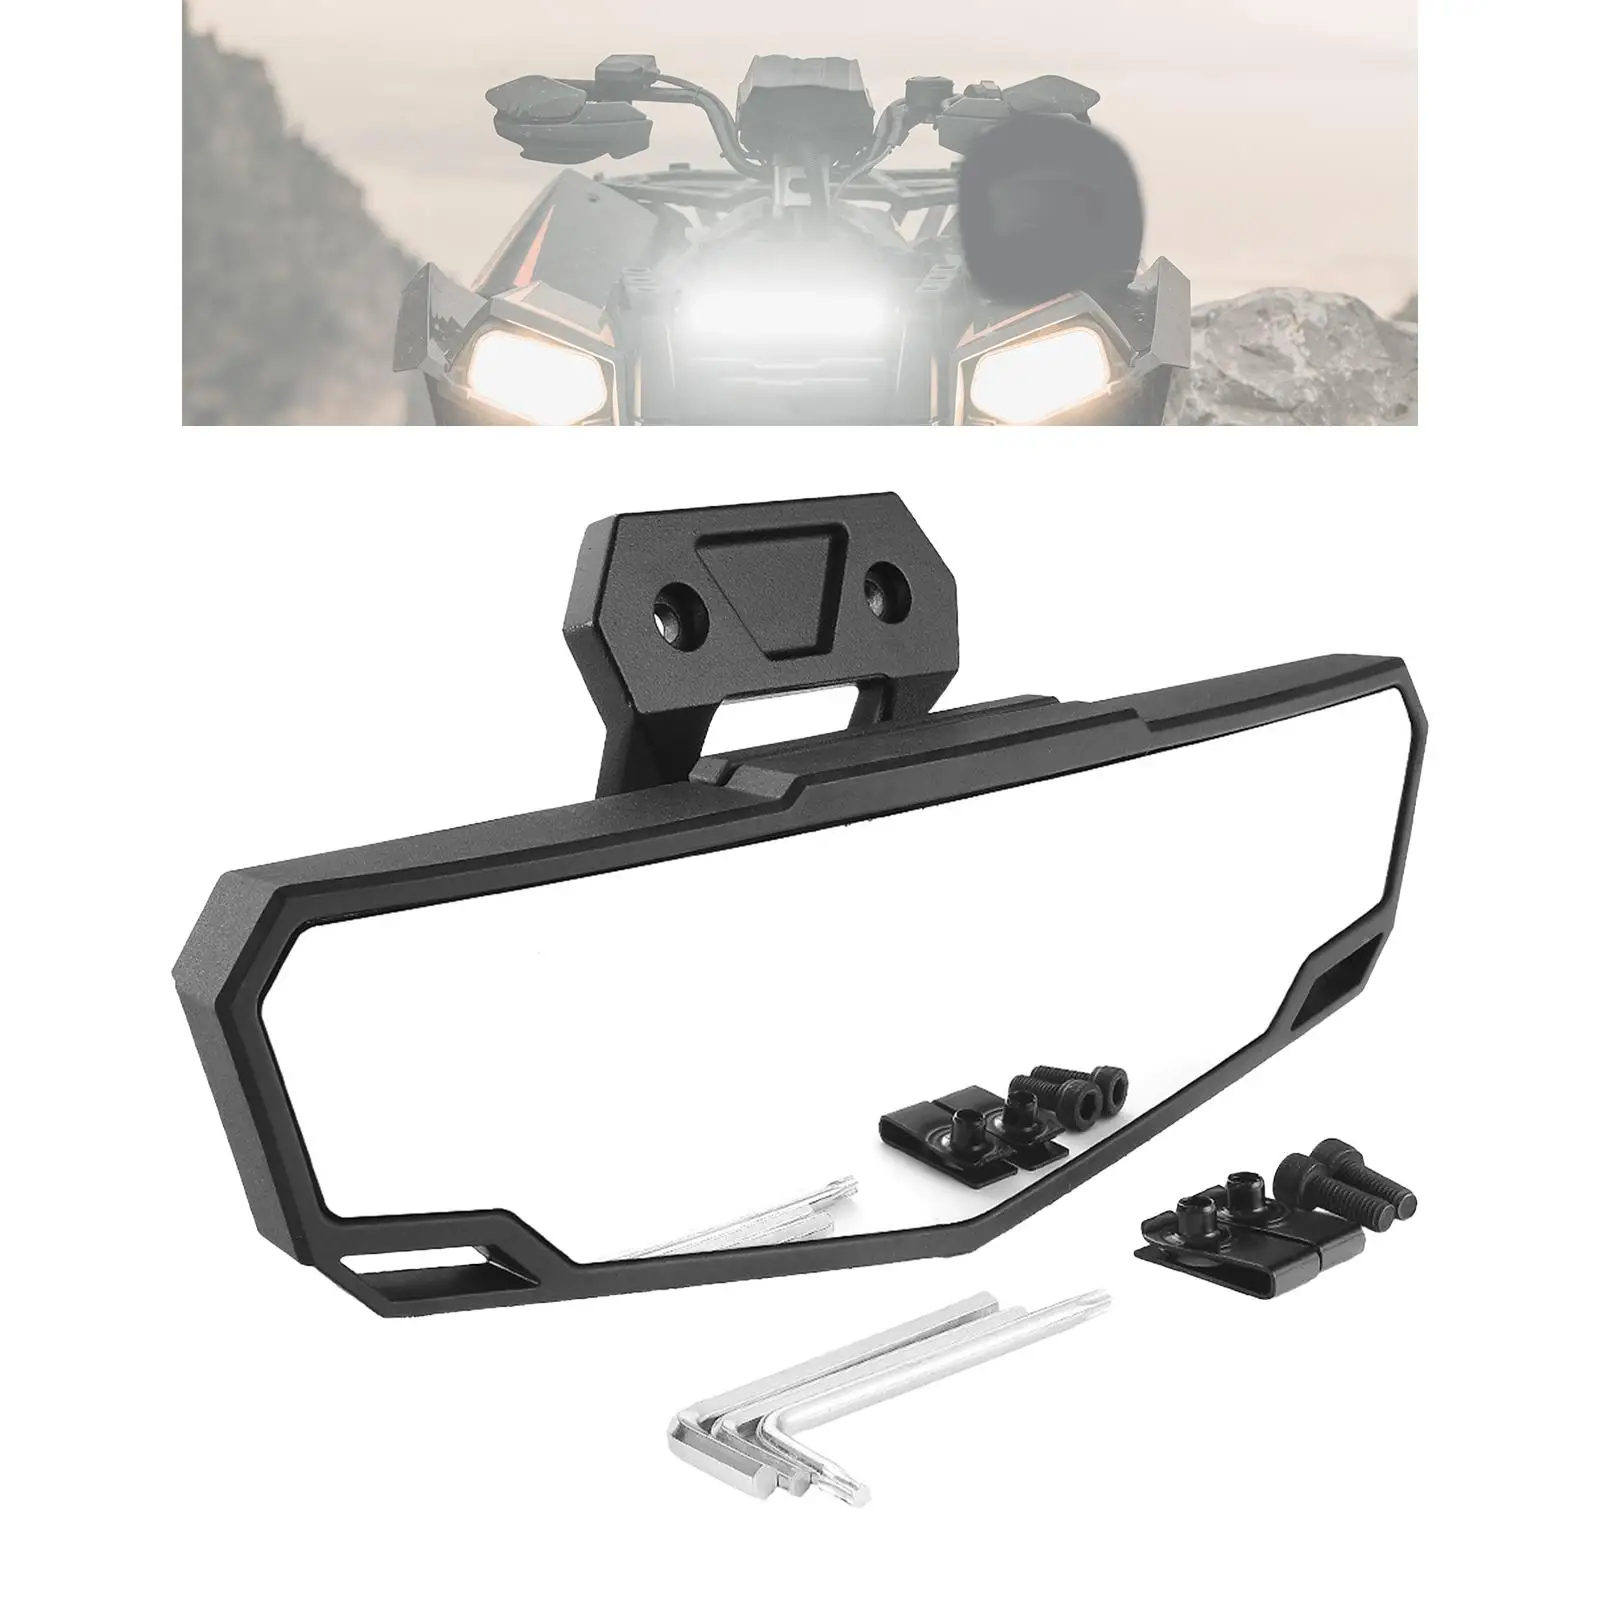 Center Rear View Mirror Convex Mirror 2883763 Accessories Replace Parts Rearview Mirror for RZR Easy Installation